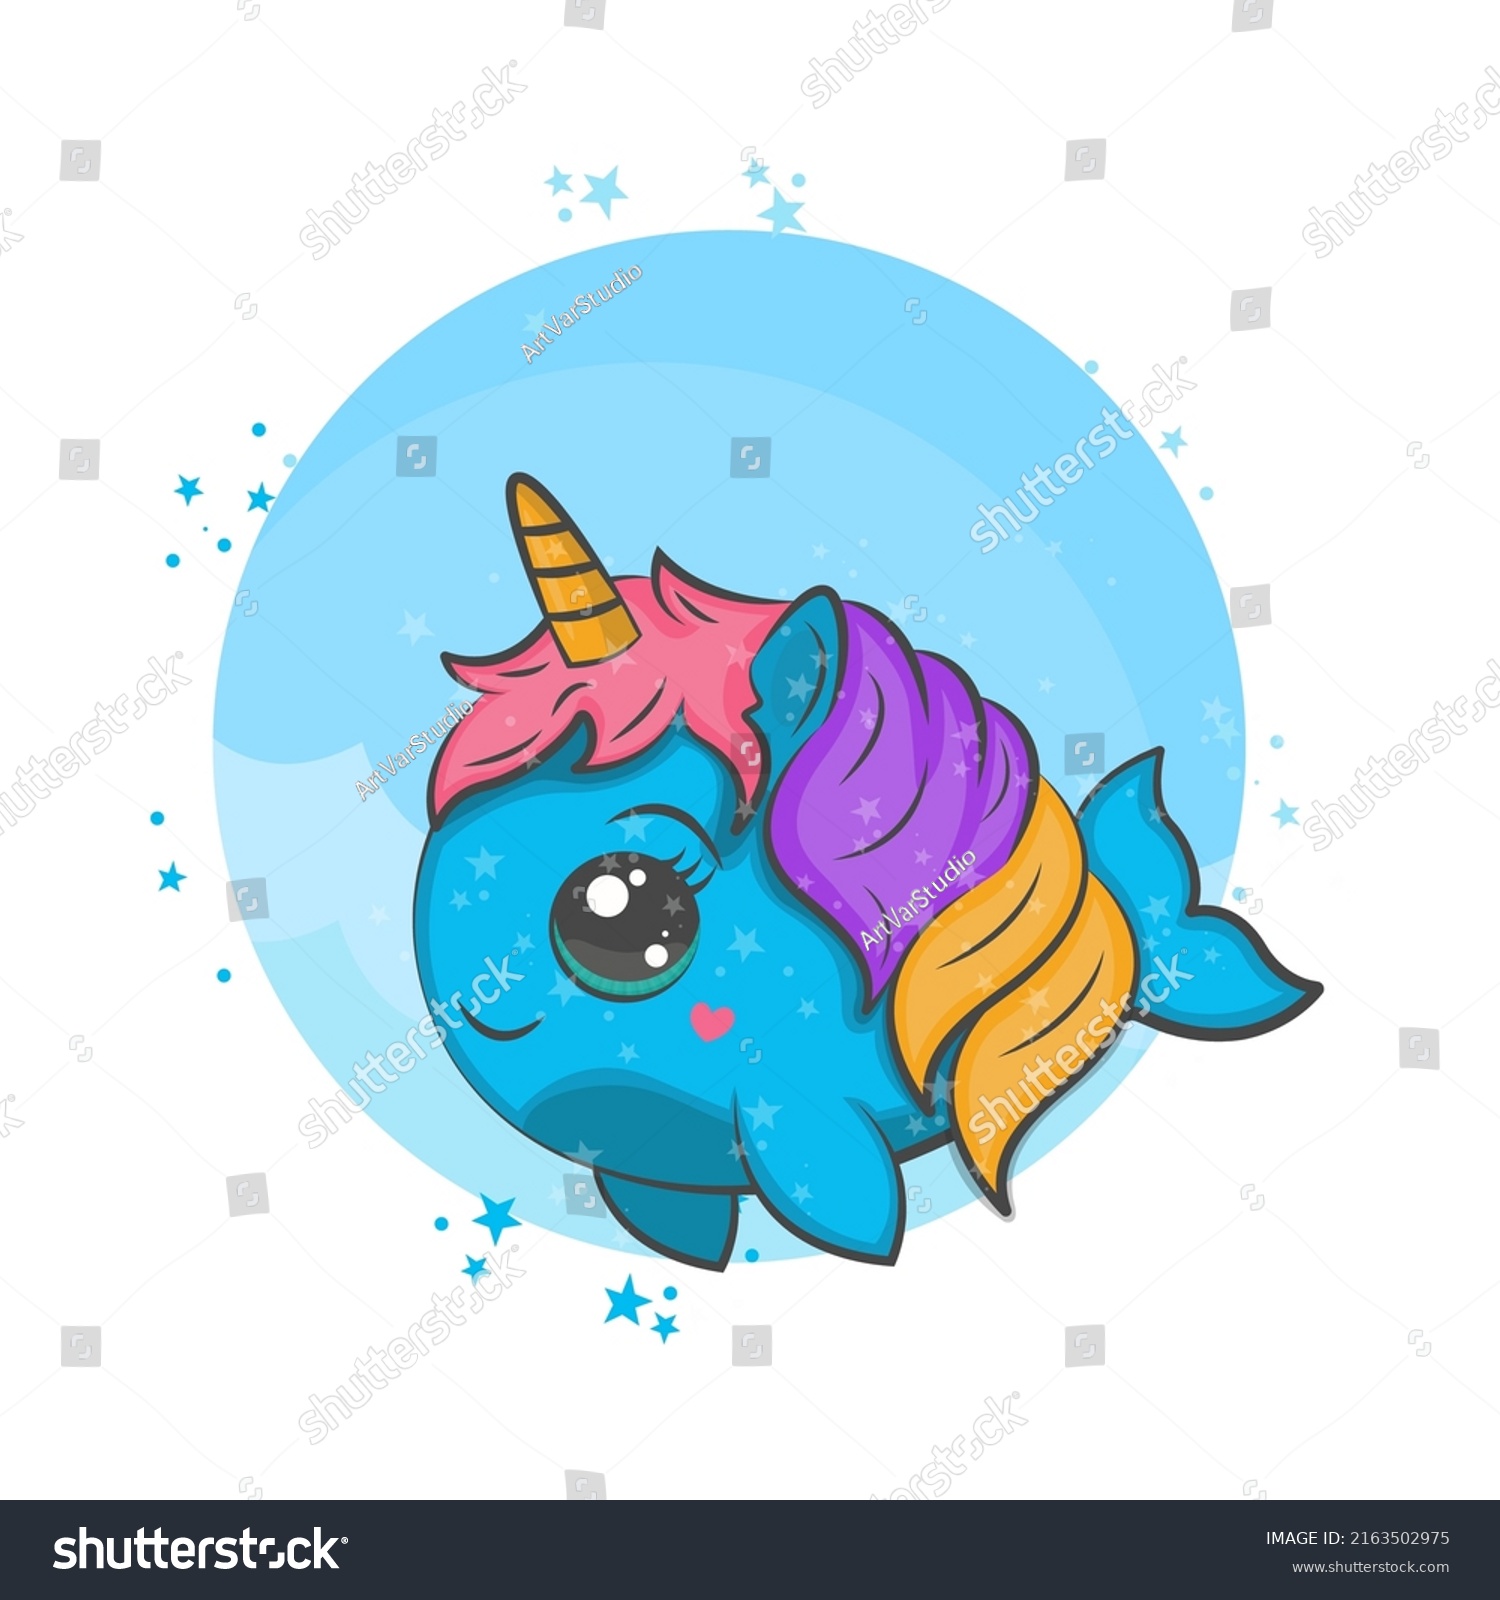 SVG of Cute whale illustration on blue themed background. Vector illustration of an animal. Cute illustration of animal for kids, baby book, fairy tales, baby shower invitation, textile t-shirt, sticker. svg